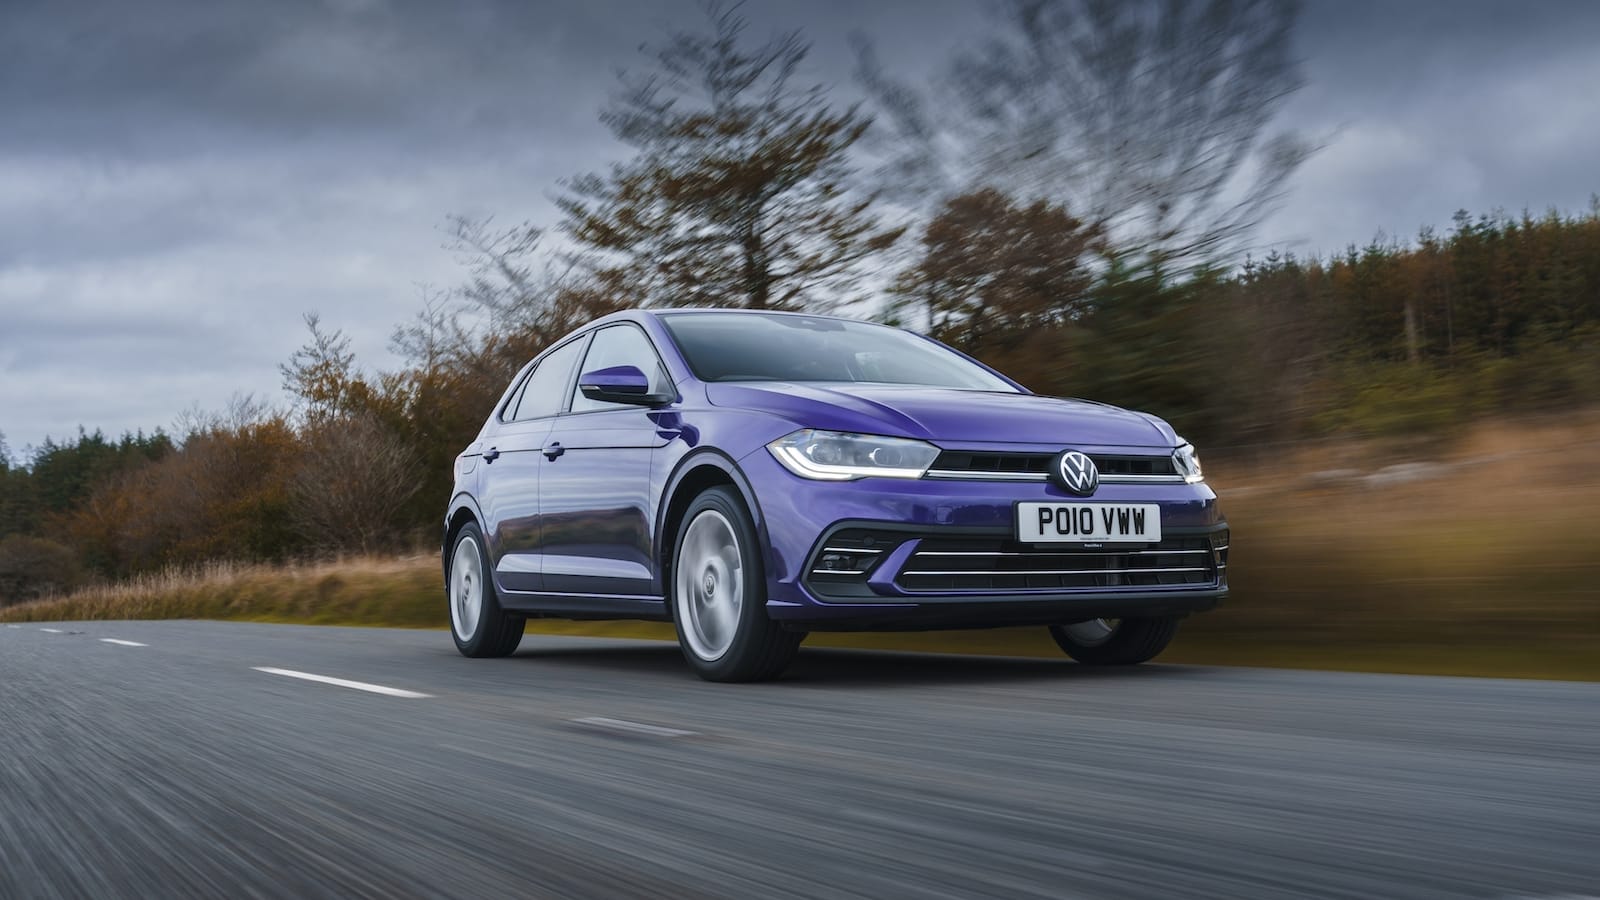 Volkswagen Polo tops the sales charts, August 2022